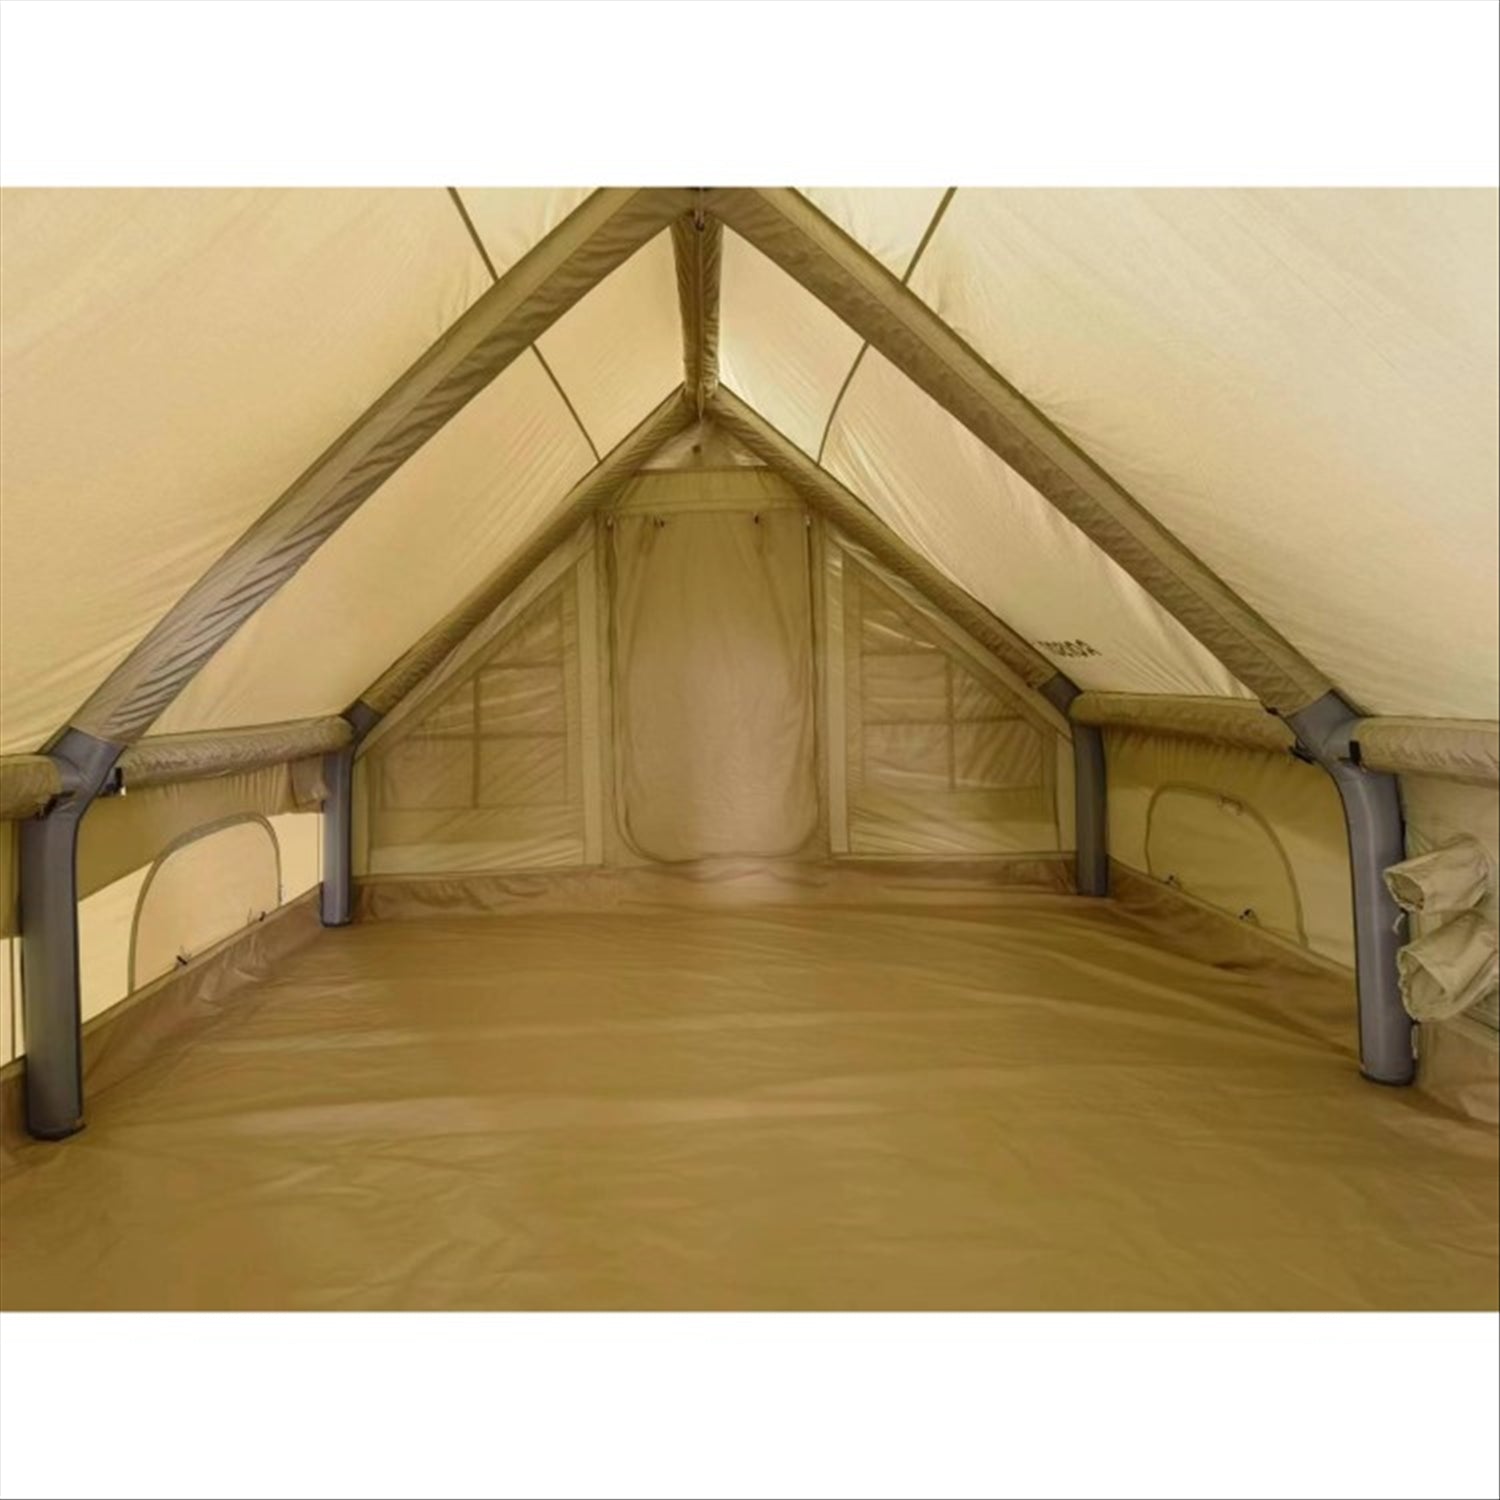 Orson Inflatable Airpole Canvas Cabin Tent - 4m x 3m - sample